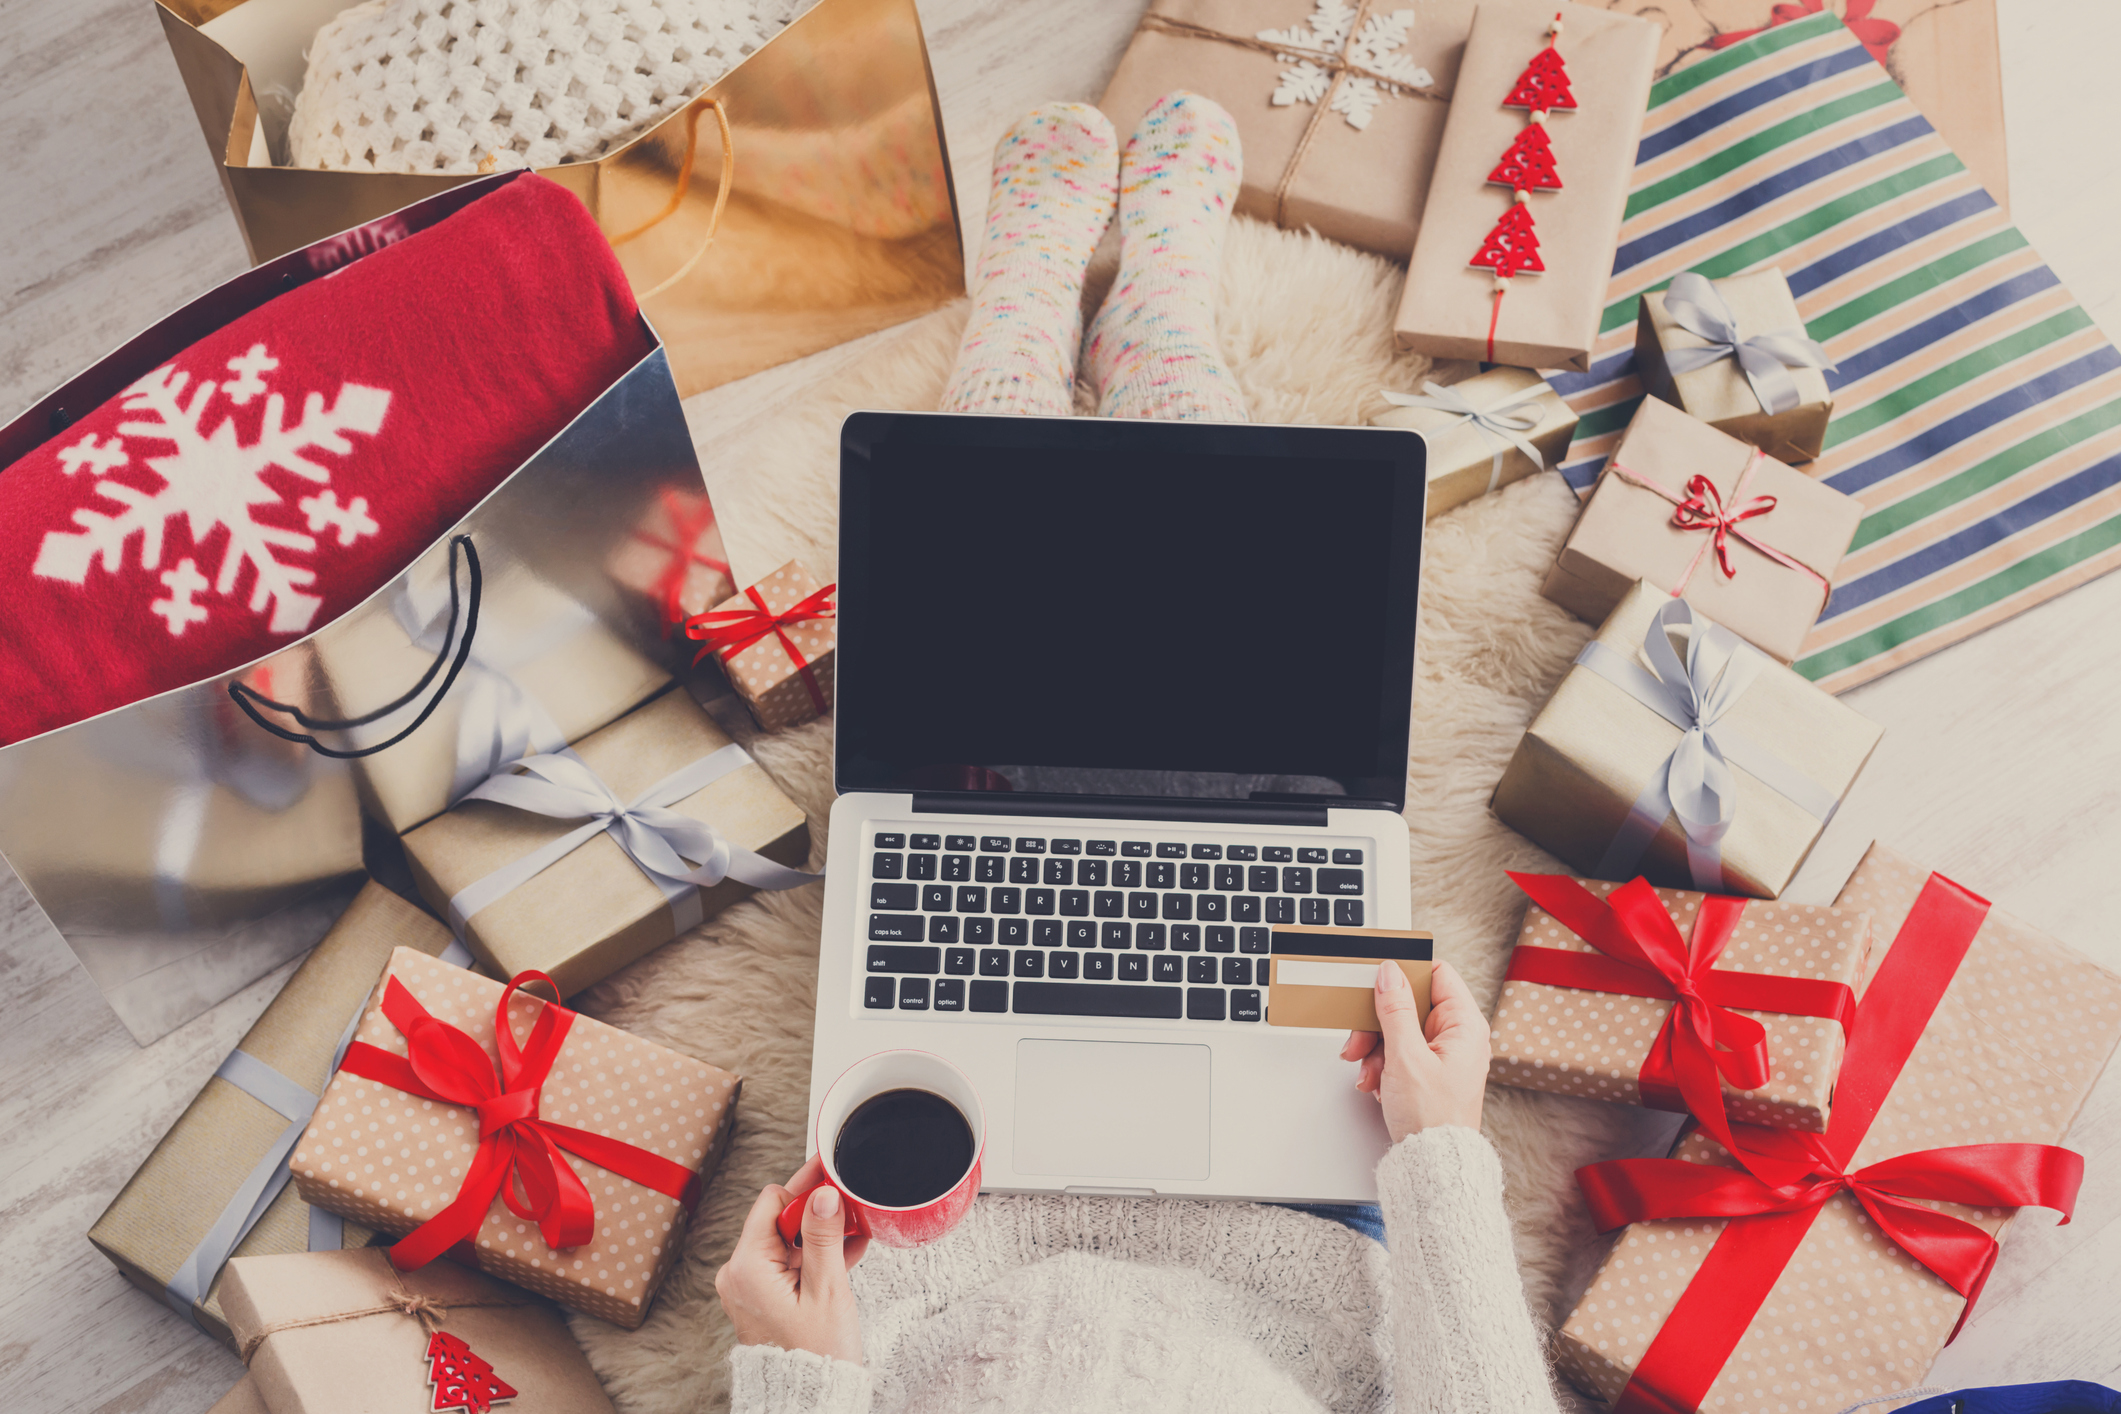 Tis the season for a spike in identity theft—12 tips to stay safe during the holidays